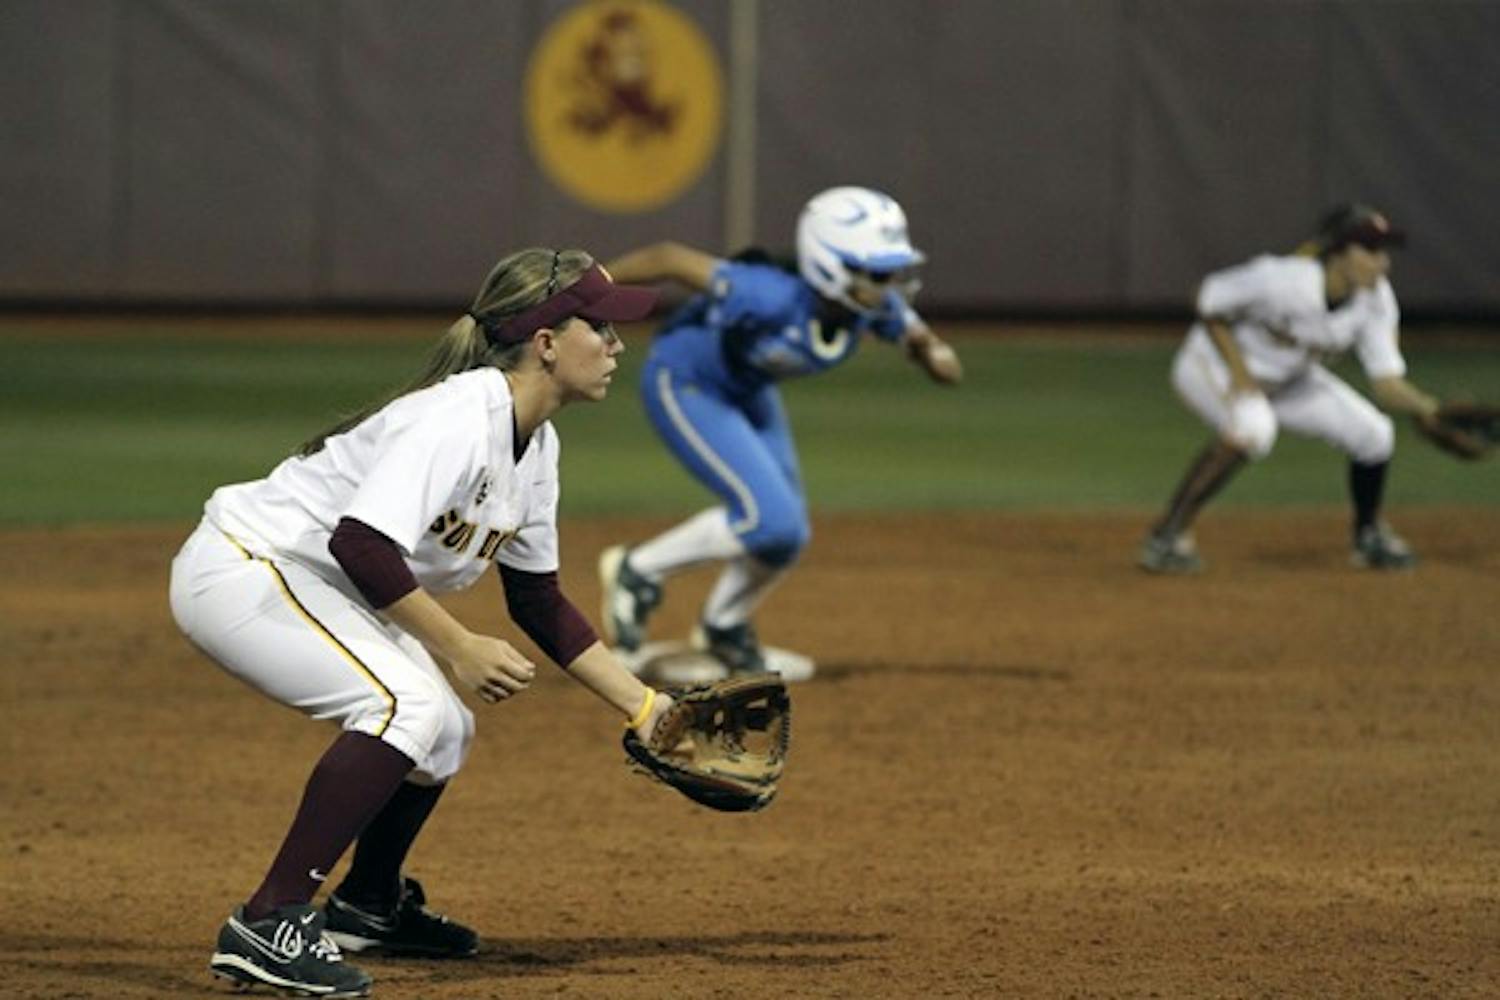 Make that two: ASU senior catcher Kaylyn Castillo waits in the warm-up circle during the Sun Devils’ 11-3 win over UC Santa Barbara on March 26. ASU won their second conference series of the season against Oregon over the weekend. (Photo by Michael Arellano)